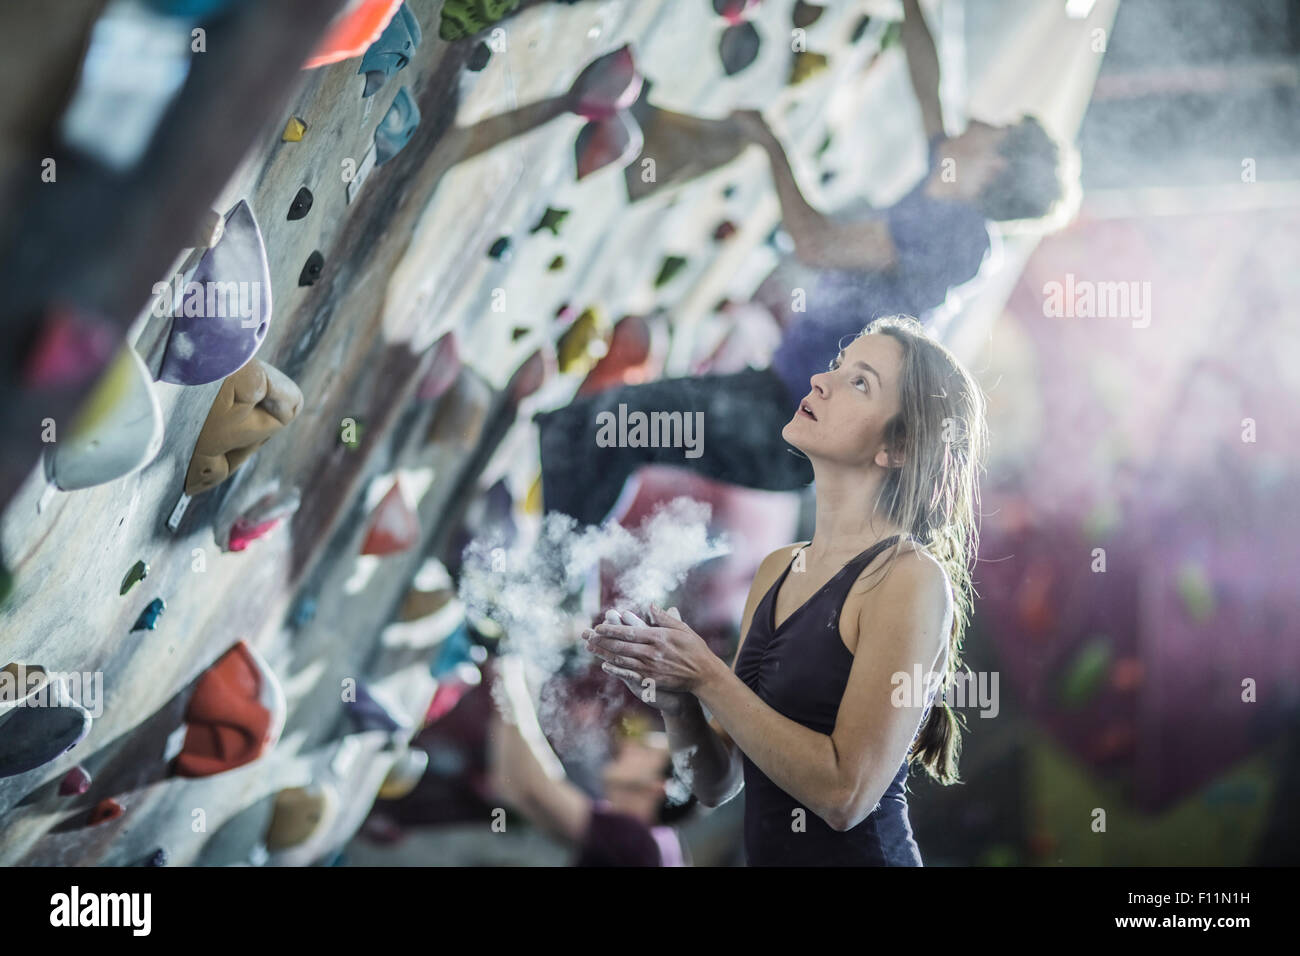 Farinage athlète ses mains à rock wall in gym Banque D'Images